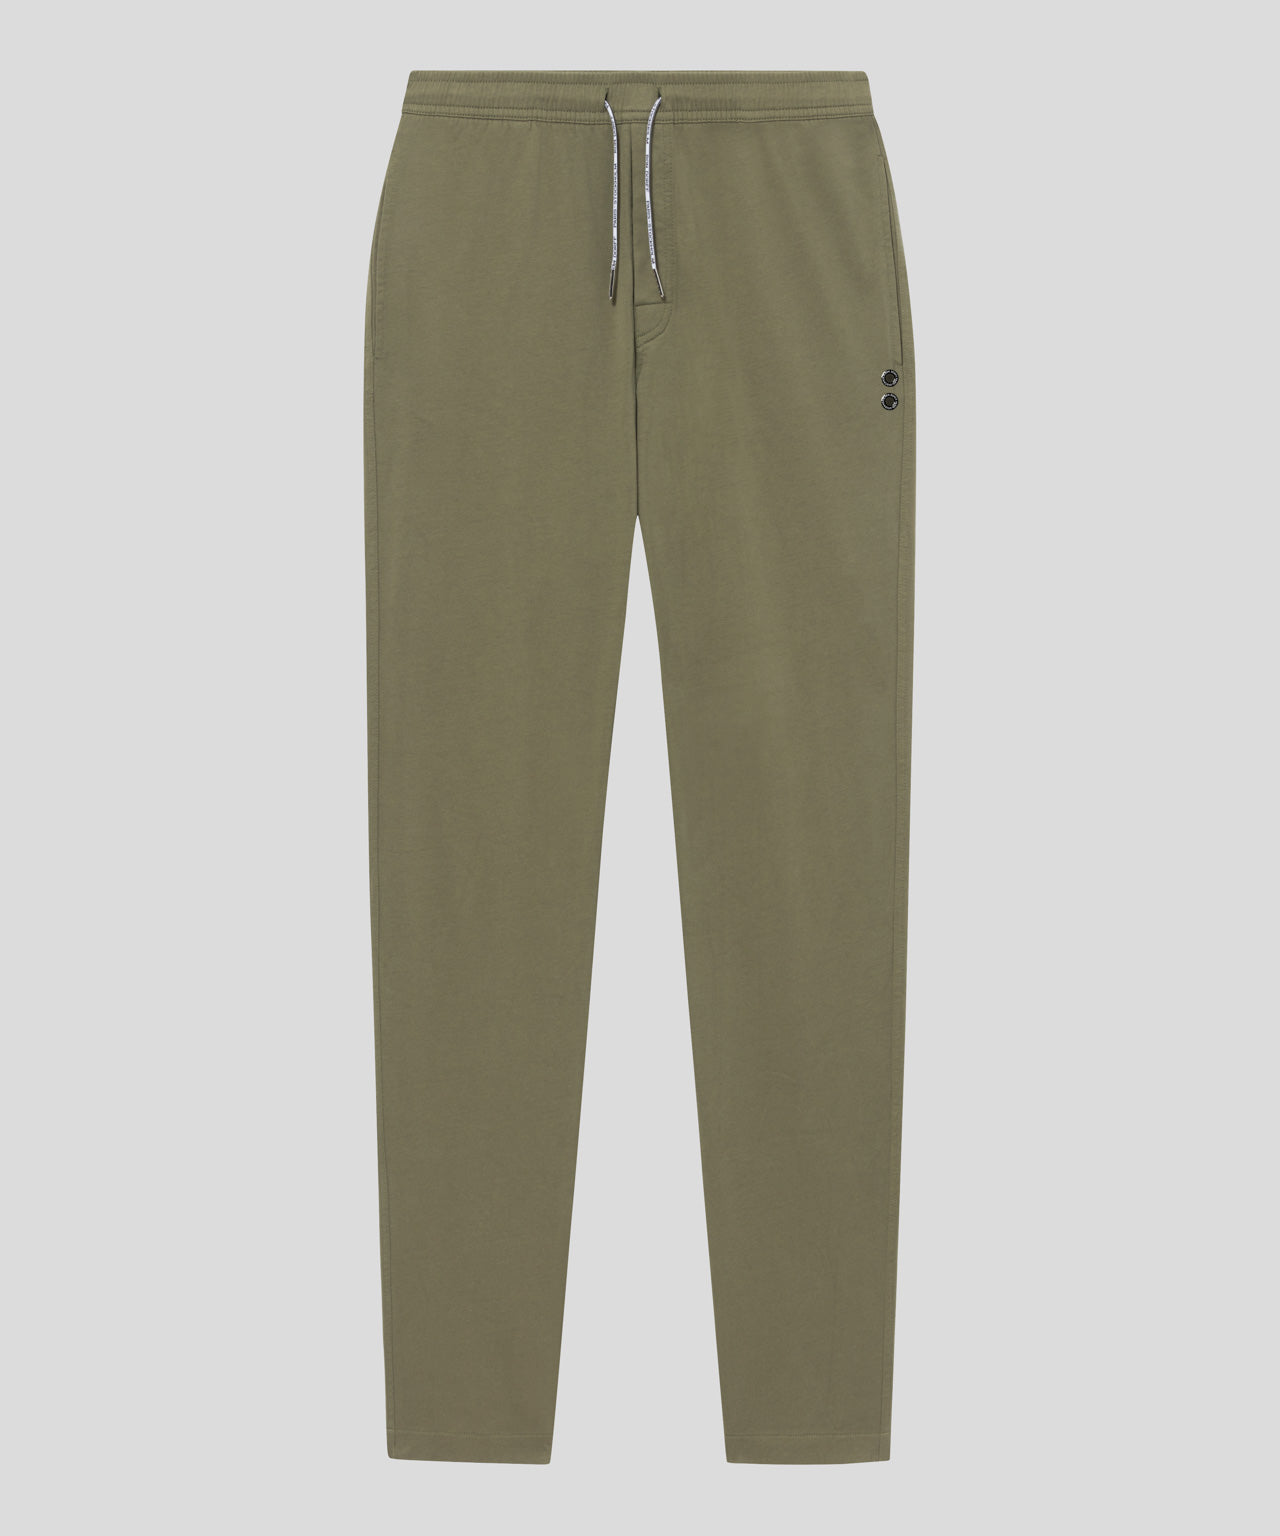 Cotton Home Pants: Olive Green